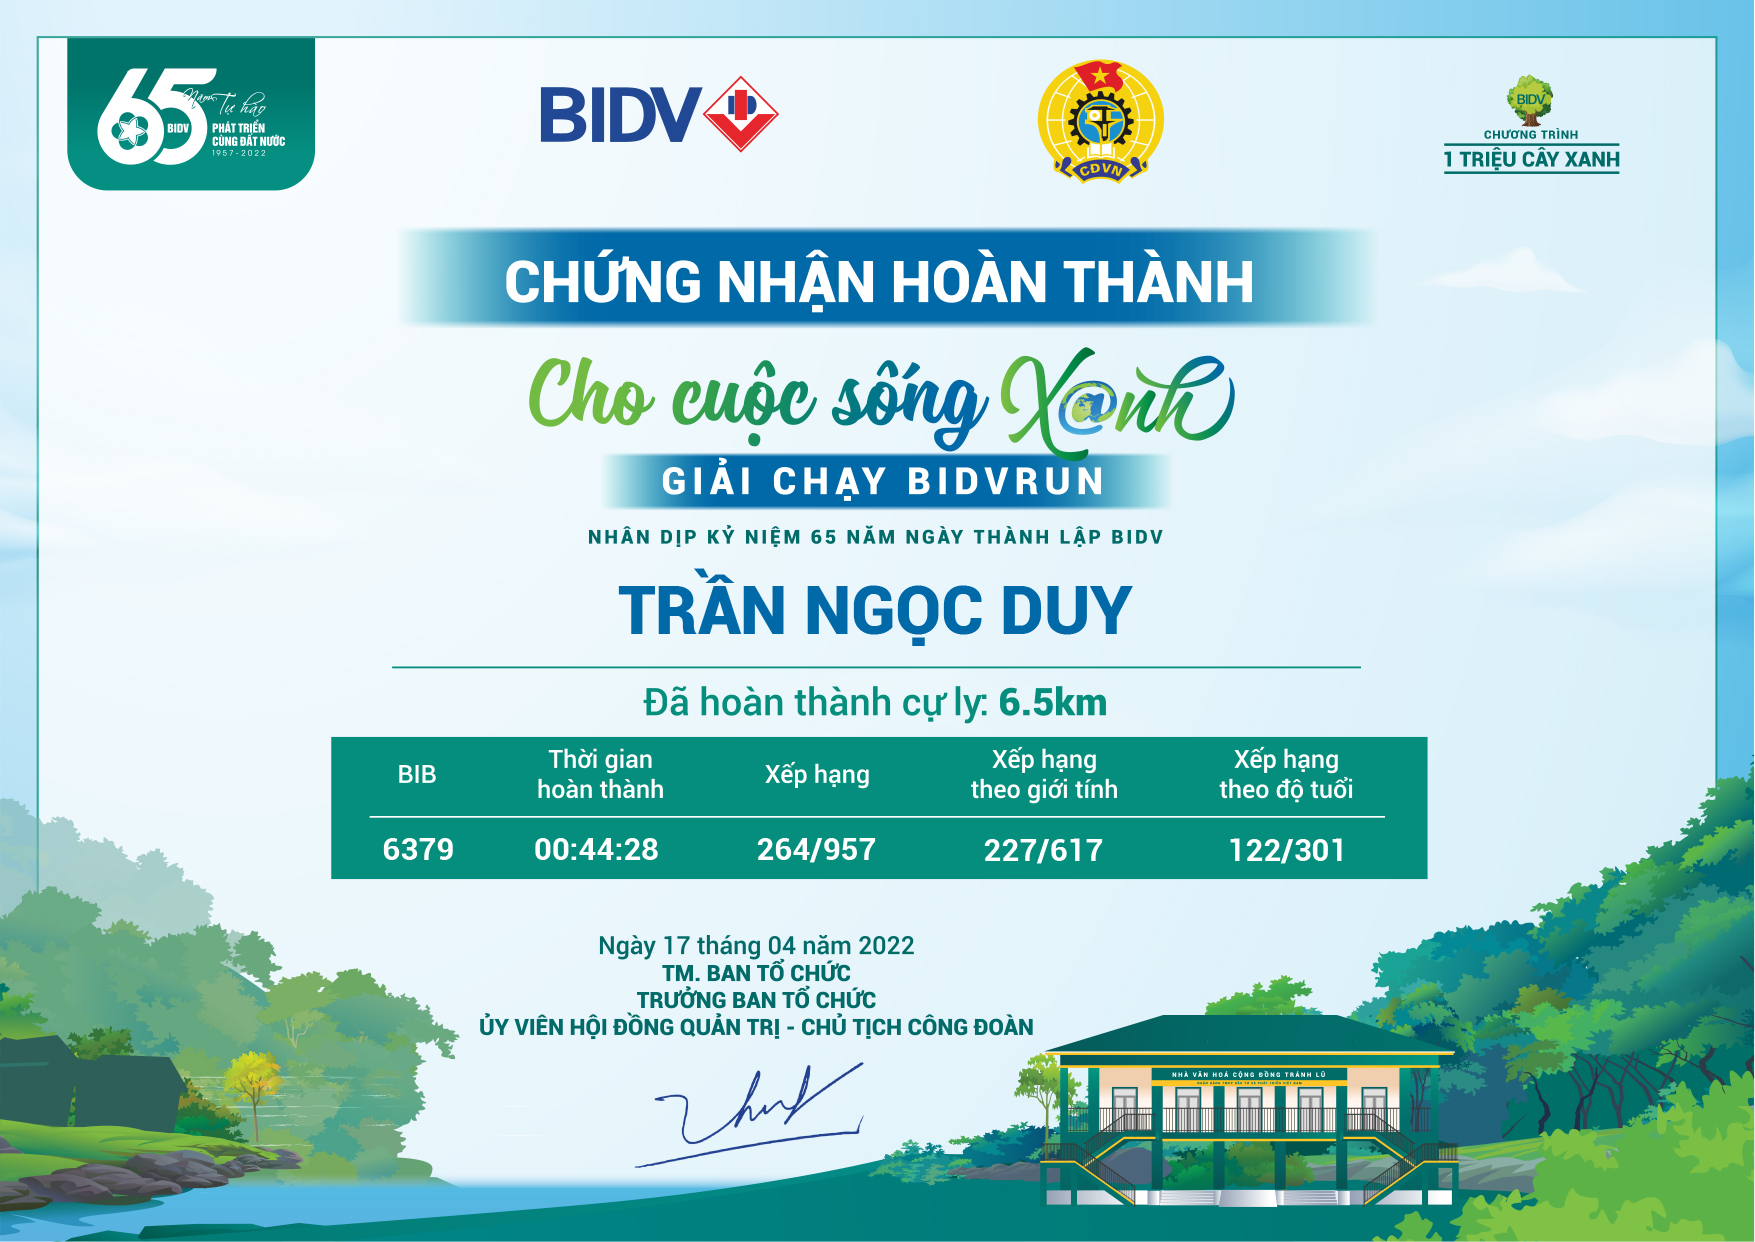 6379 - Trần Ngọc Duy